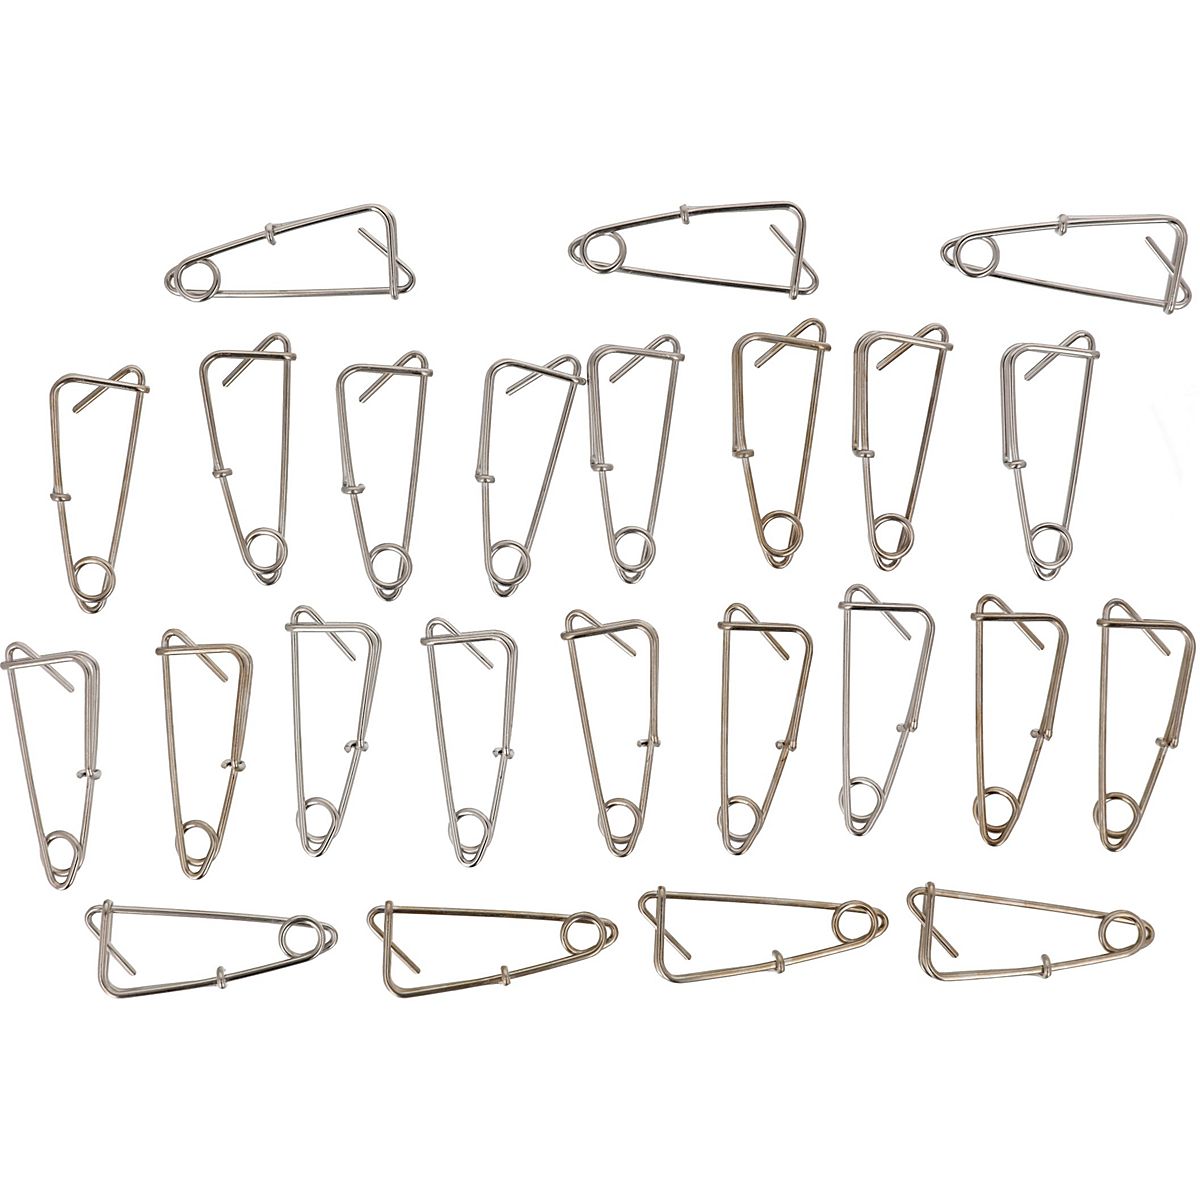 Eagle Claw Stainless Trotline Clips 25-Pack